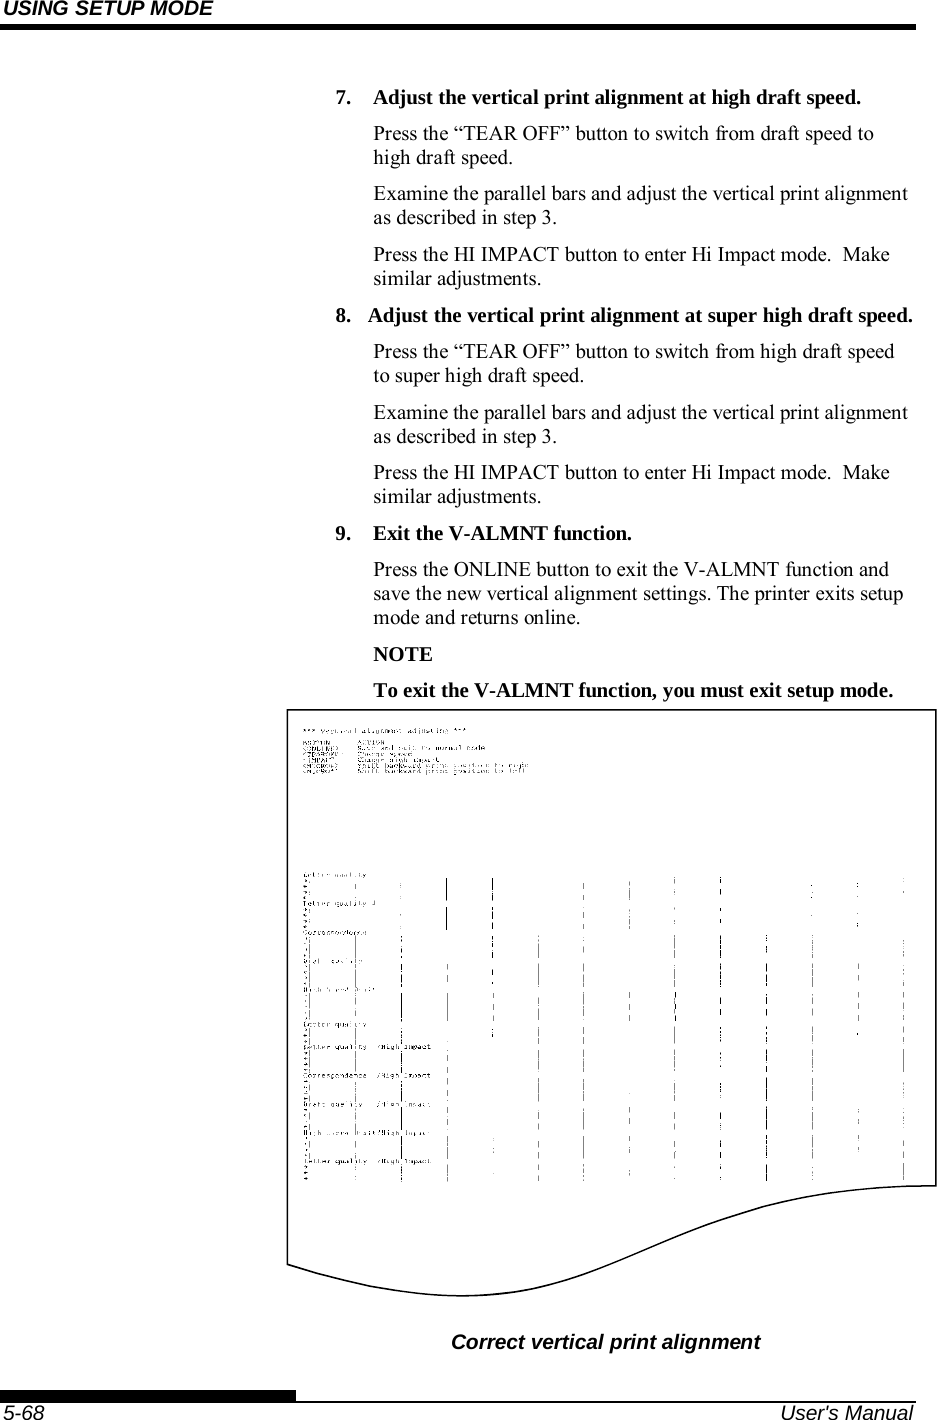 USING SETUP MODE    5-68  User&apos;s Manual 7.  Adjust the vertical print alignment at high draft speed. Press the “TEAR OFF” button to switch from draft speed to high draft speed. Examine the parallel bars and adjust the vertical print alignment as described in step 3. Press the HI IMPACT button to enter Hi Impact mode.  Make similar adjustments. 8.  Adjust the vertical print alignment at super high draft speed. Press the “TEAR OFF” button to switch from high draft speed to super high draft speed. Examine the parallel bars and adjust the vertical print alignment as described in step 3. Press the HI IMPACT button to enter Hi Impact mode.  Make similar adjustments. 9.  Exit the V-ALMNT function. Press the ONLINE button to exit the V-ALMNT function and save the new vertical alignment settings. The printer exits setup mode and returns online. NOTE To exit the V-ALMNT function, you must exit setup mode.     Correct vertical print alignment 